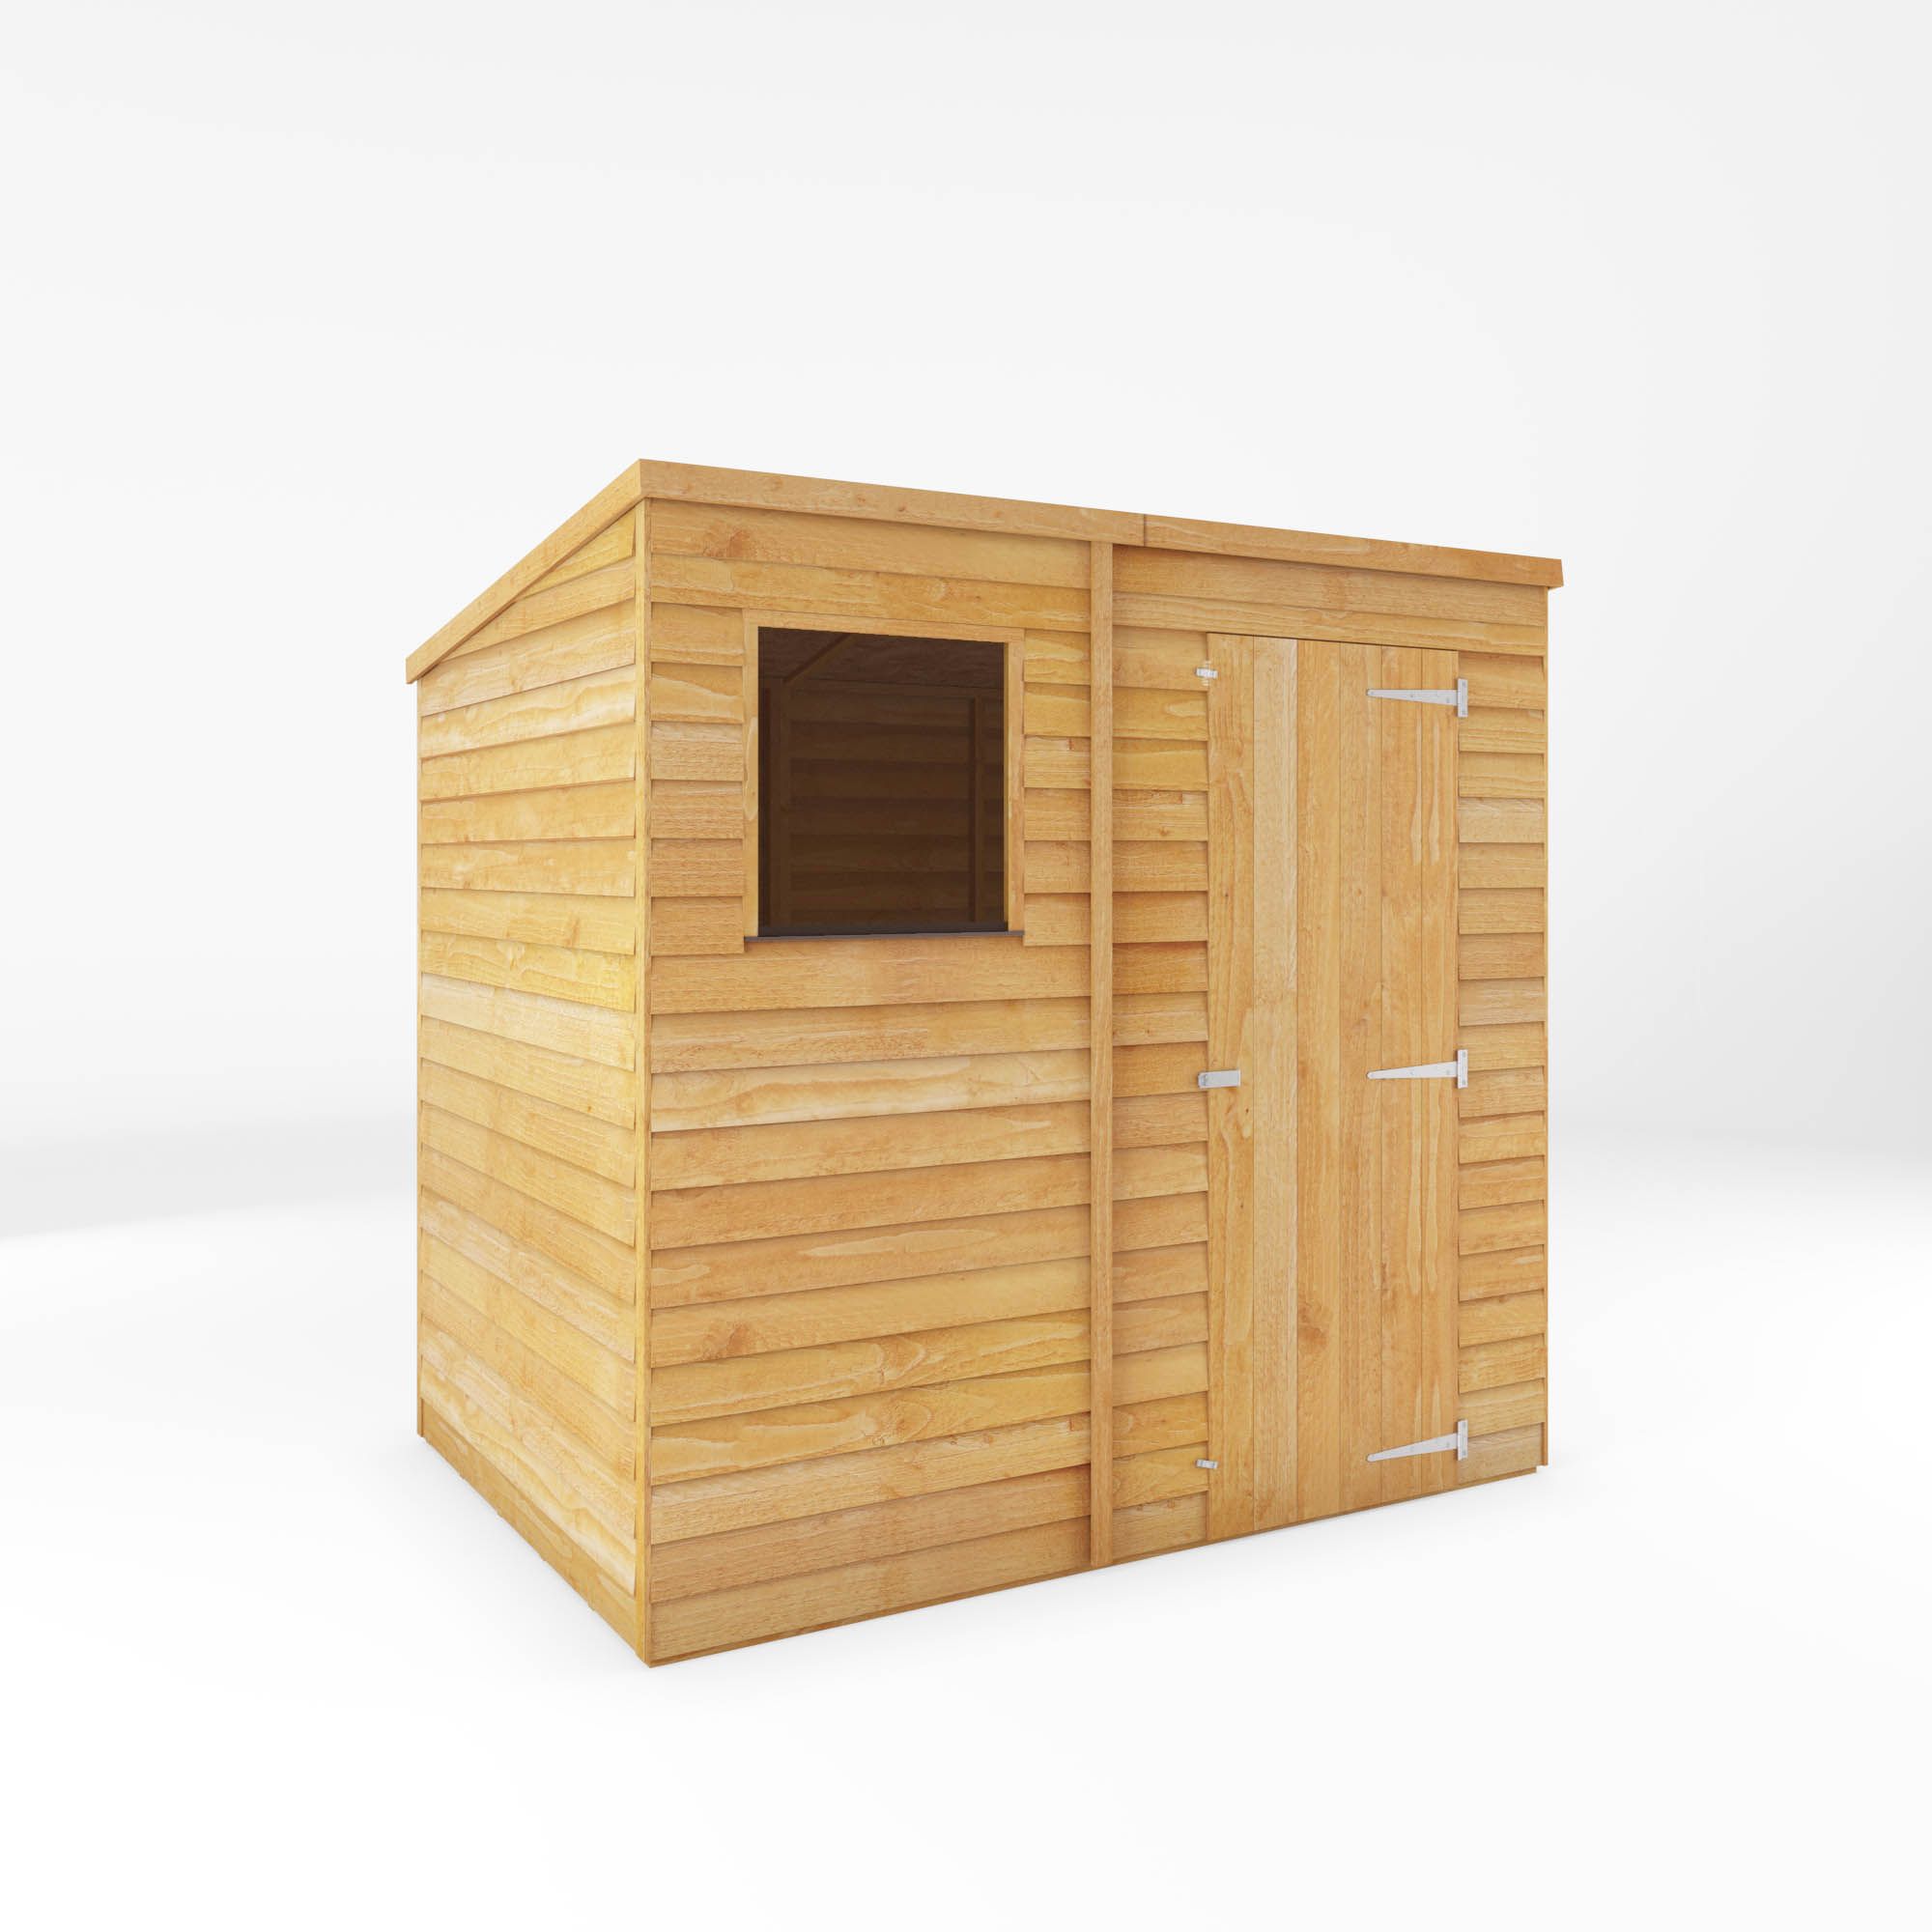 Mercia 7x5 ft Pent Wooden Shed with floor & 1 window